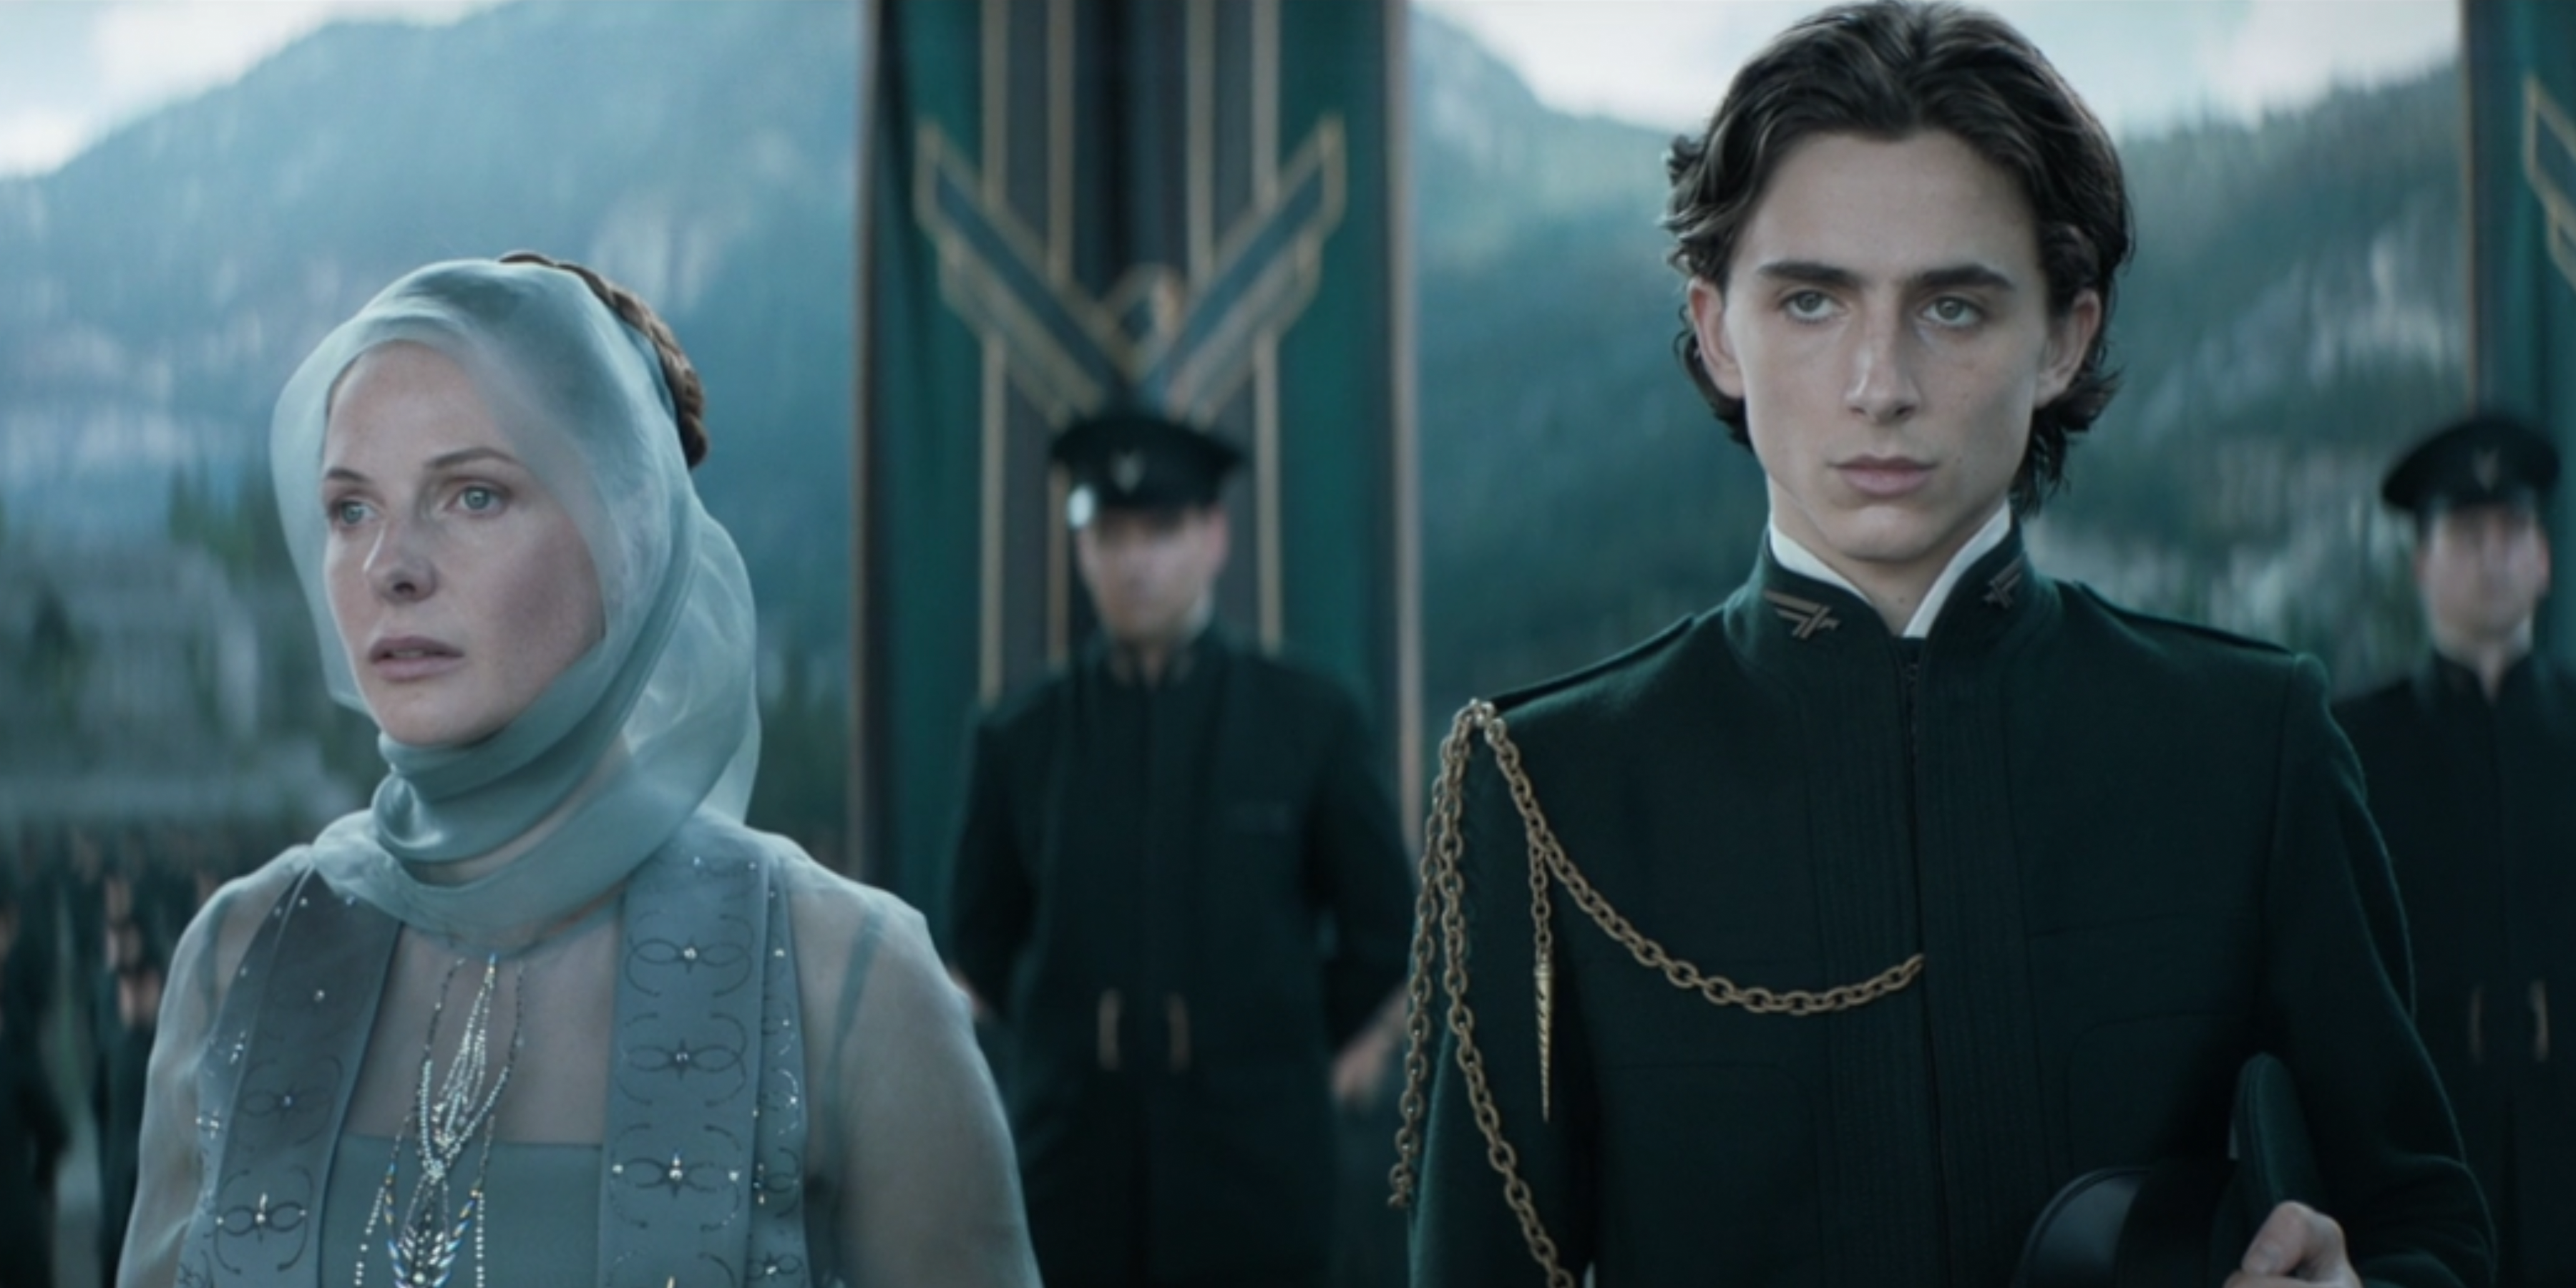 Lady Jessica and Paul Atreides standing next to each other in Dune